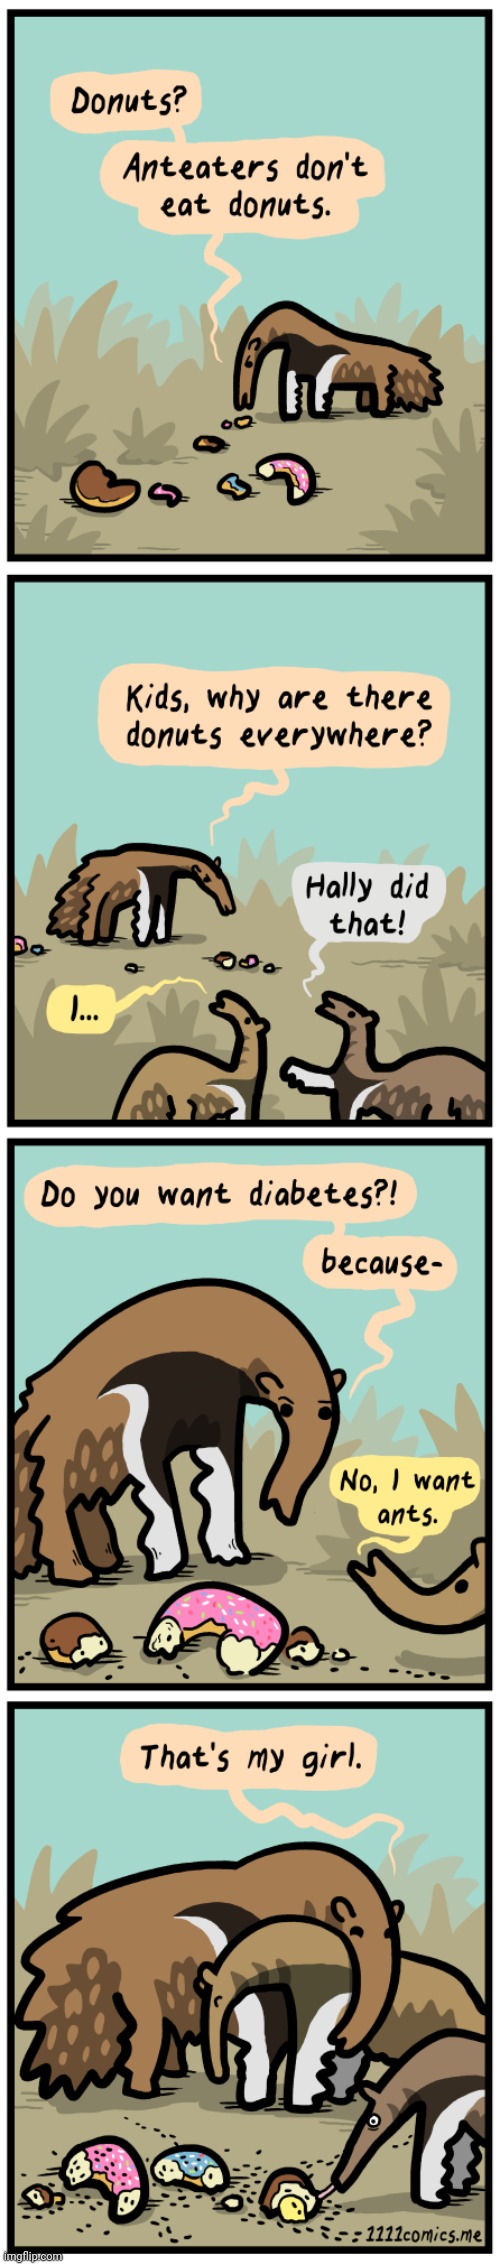 Anteaters | image tagged in anteater,anteaters,donuts,comics,comics/cartoons,diabetes | made w/ Imgflip meme maker